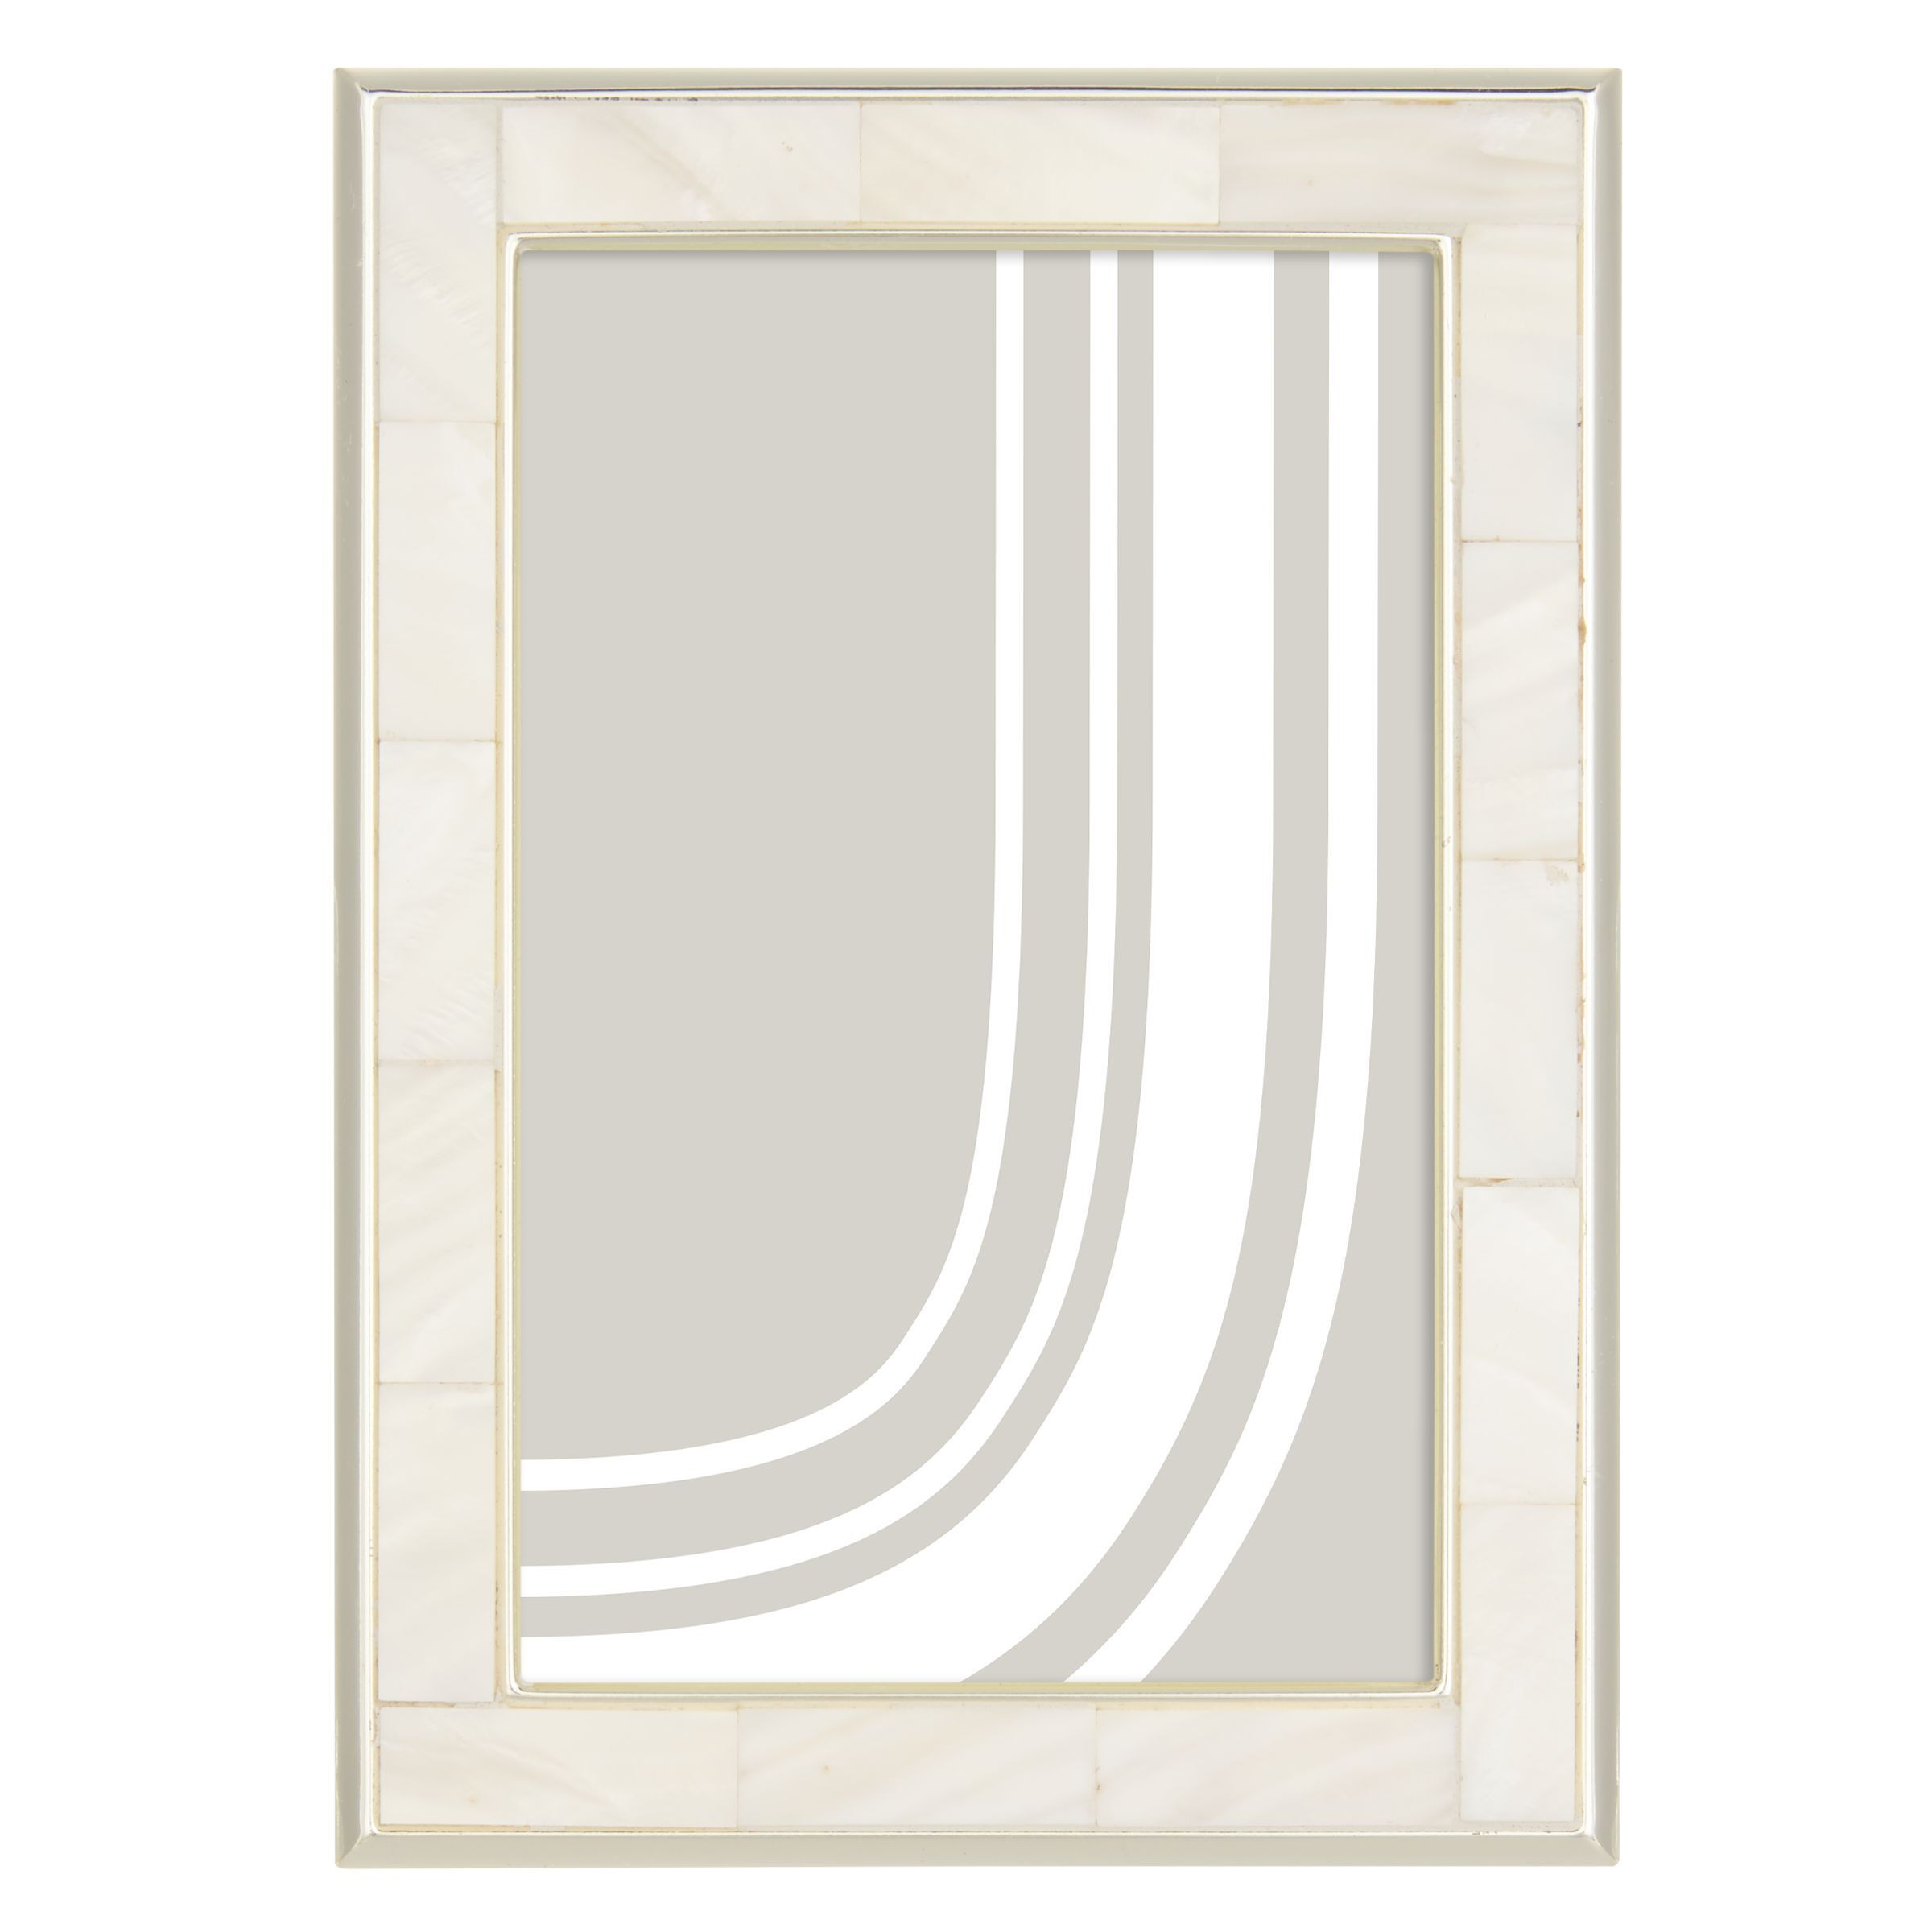 John Lewis Mother Of Pearl Photo Frame, Silver - image 1